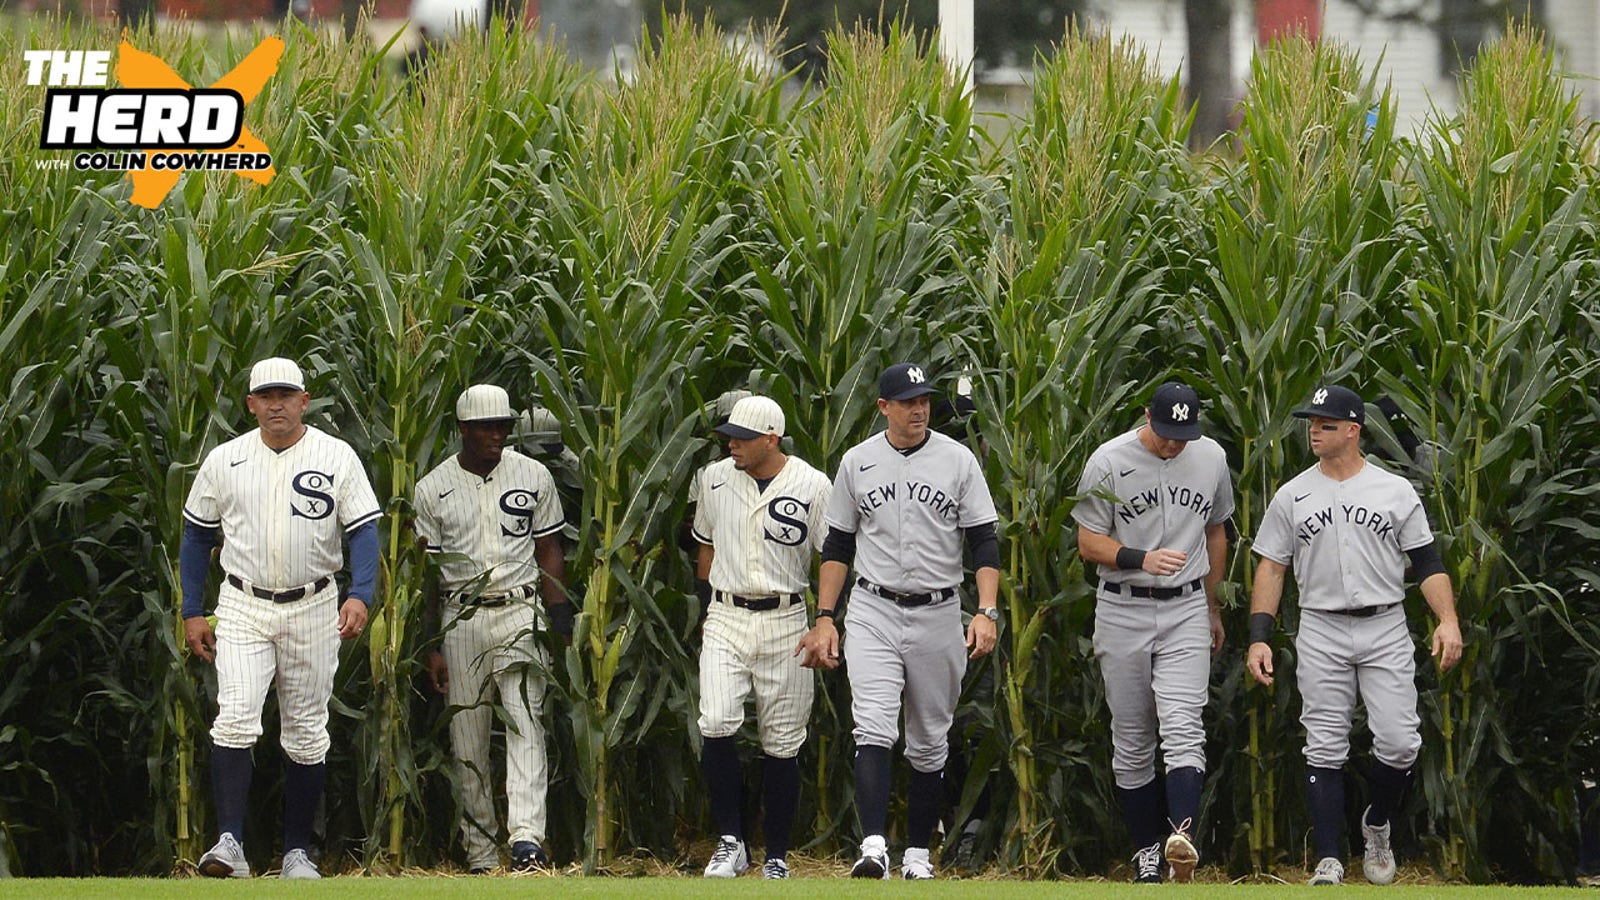 Yankees Field of Dreams game: What to expect in Iowa